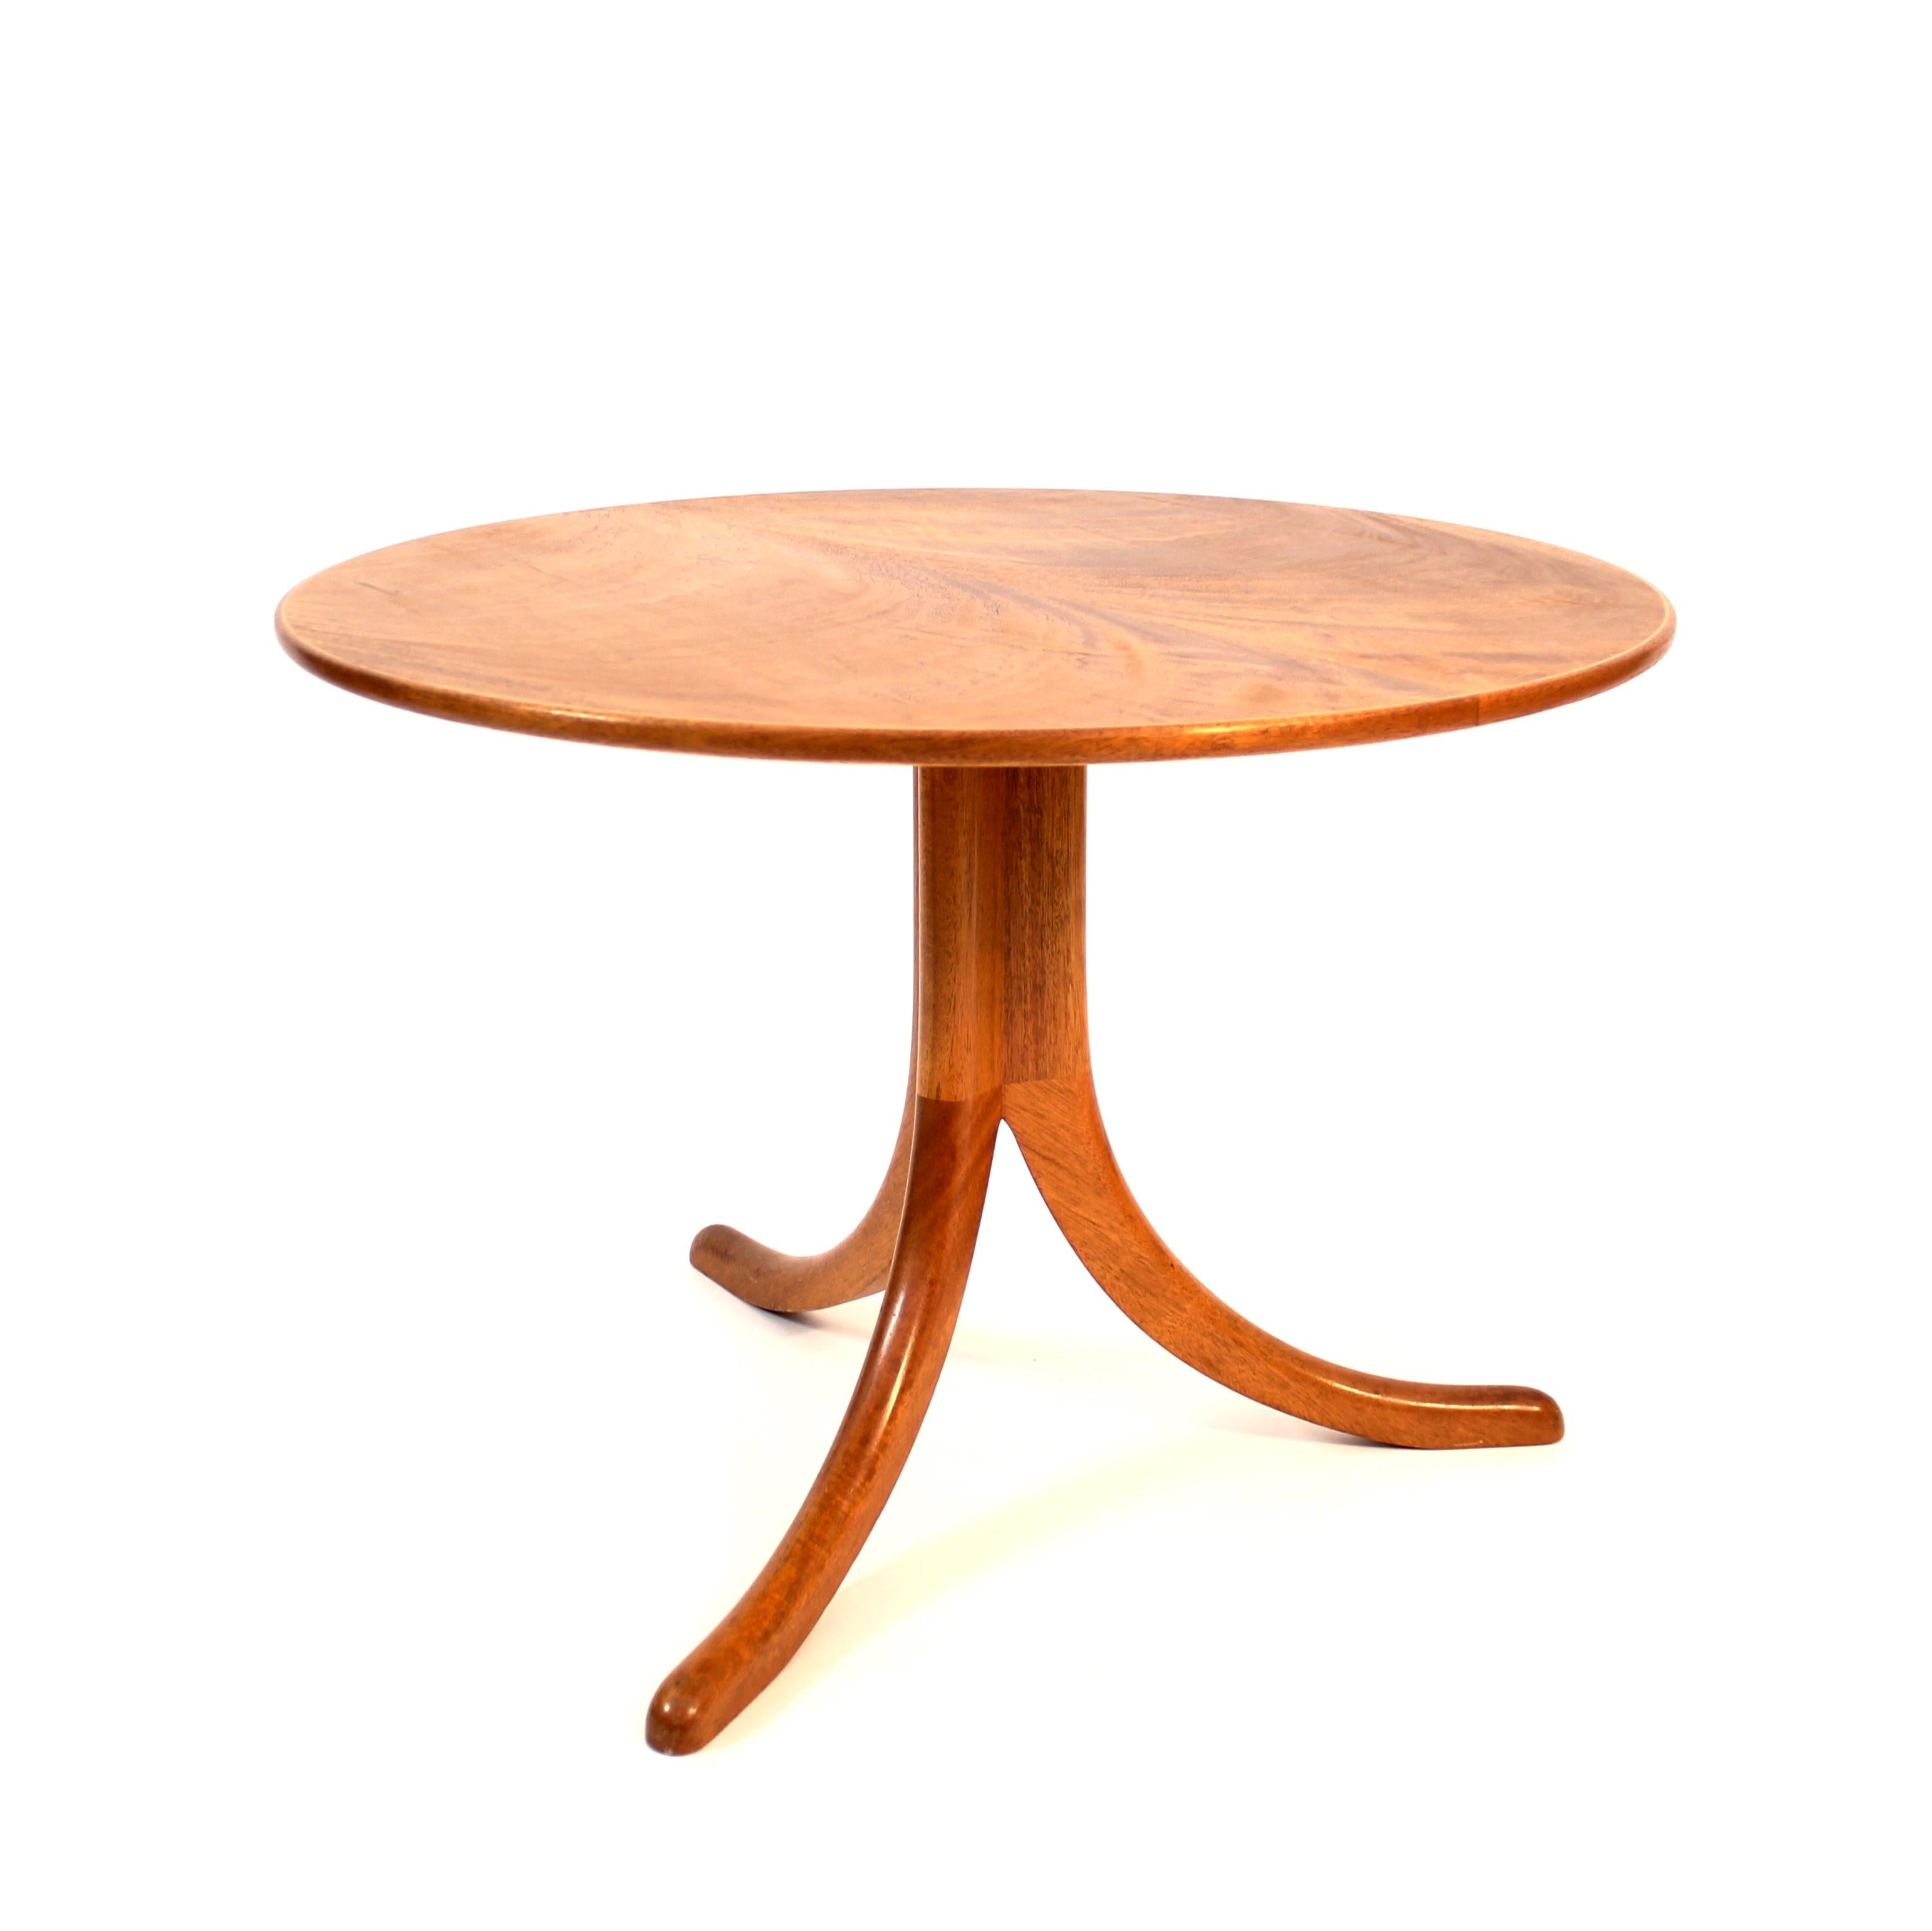 The Josef Frank designed model 1020 table for Svenskt Tenn is really a classic within the Svenskt Tenn catalog. The dining variant of this design is still in production but the coffee table version has since long been discontinued which make the